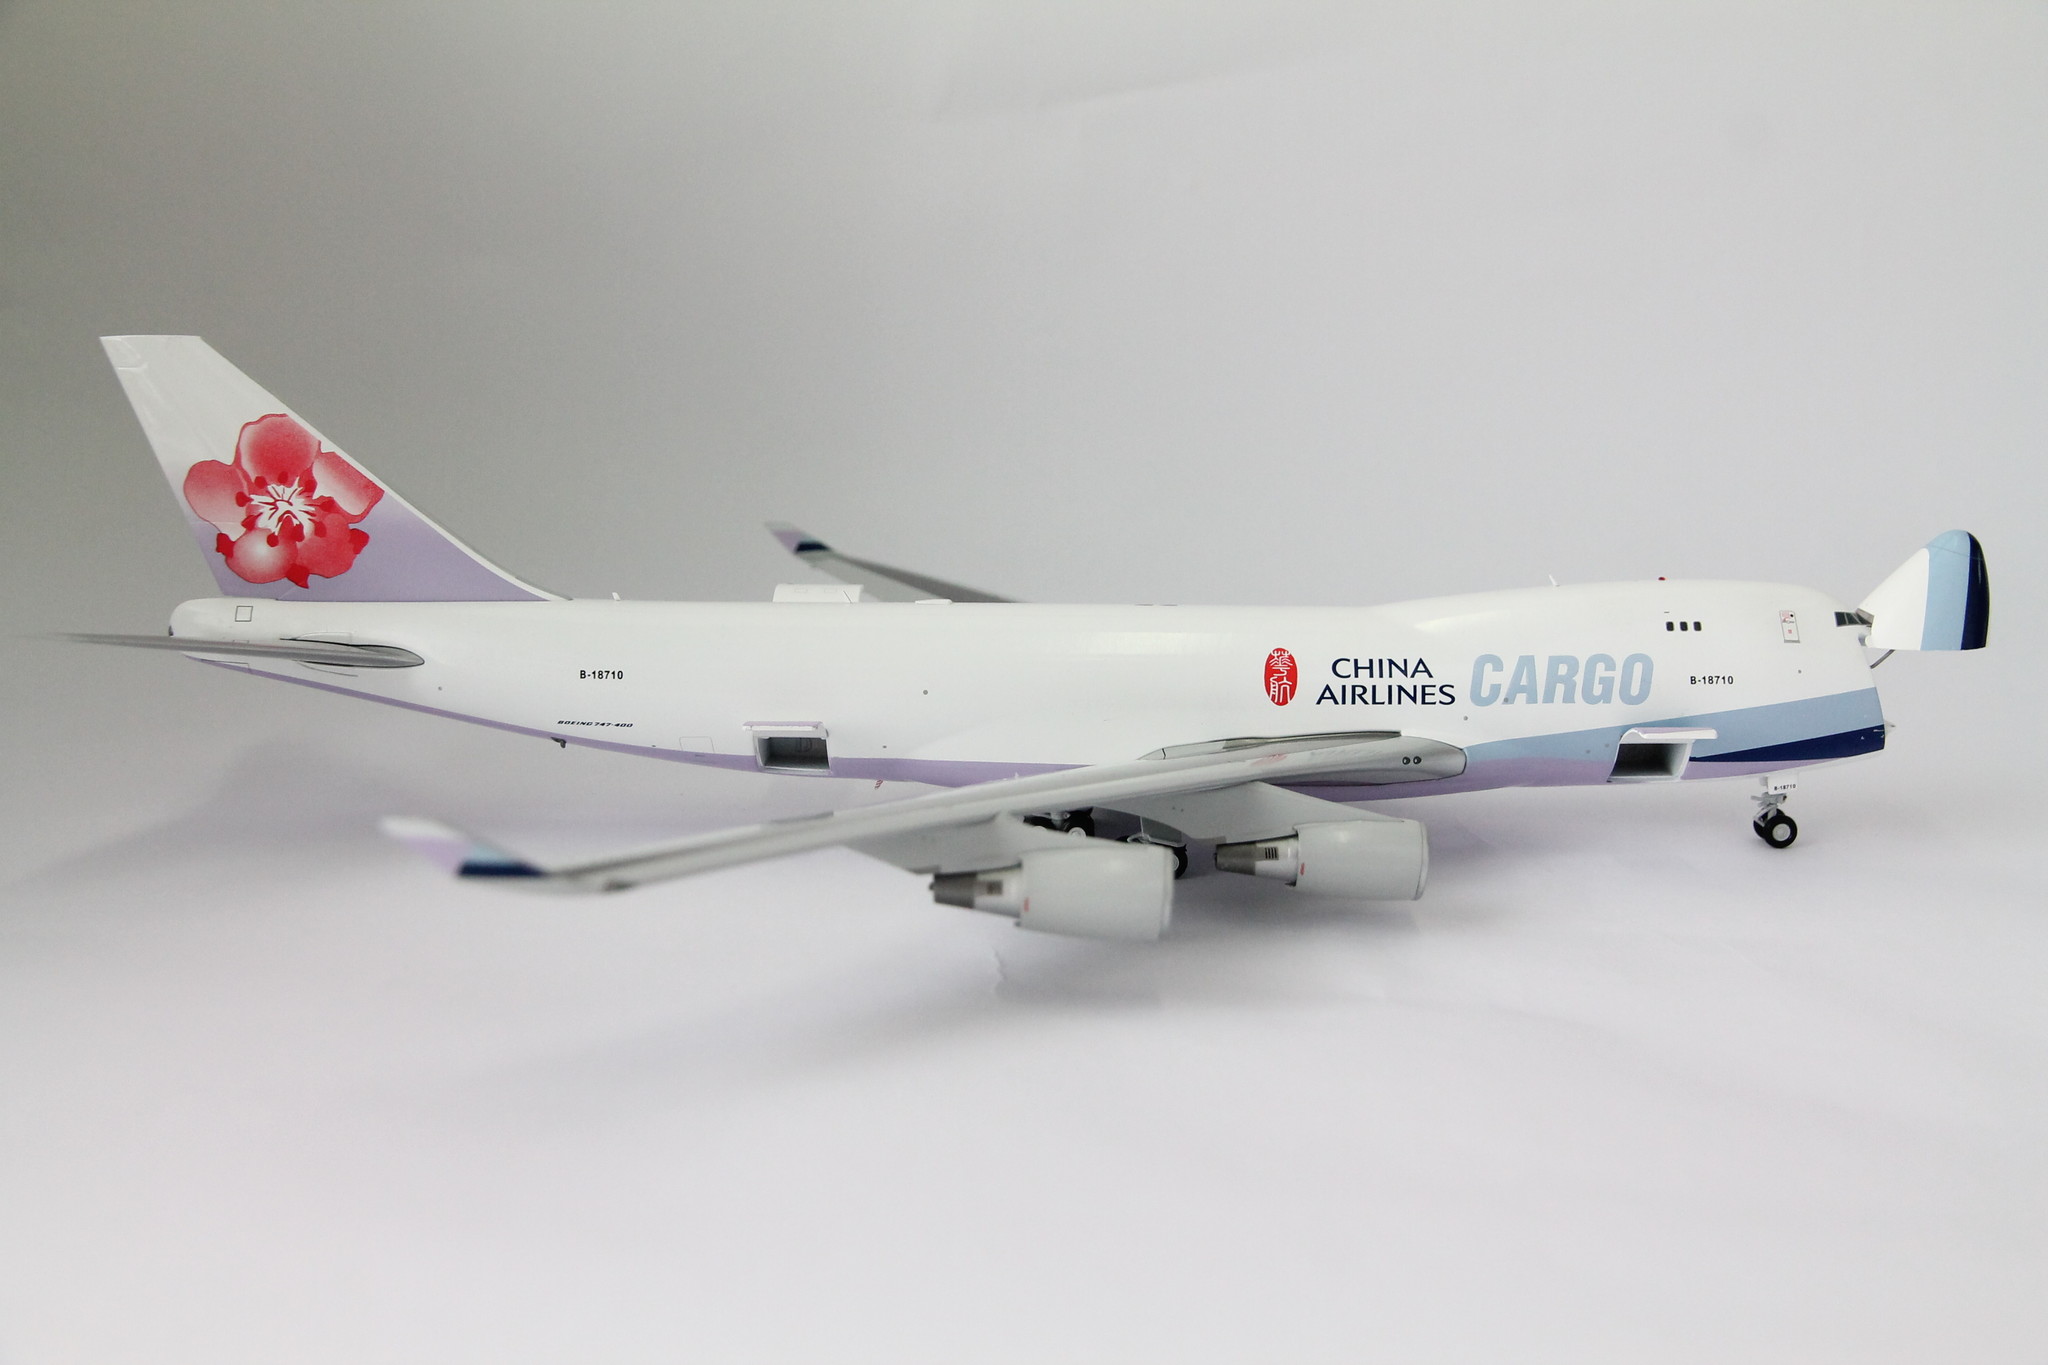 pre-Painted/pre-Built GEMG20929 1:200 Gemini Jets China Airlines Cargo Boeing 747-400F Reg #B-18710 Interactive Series 